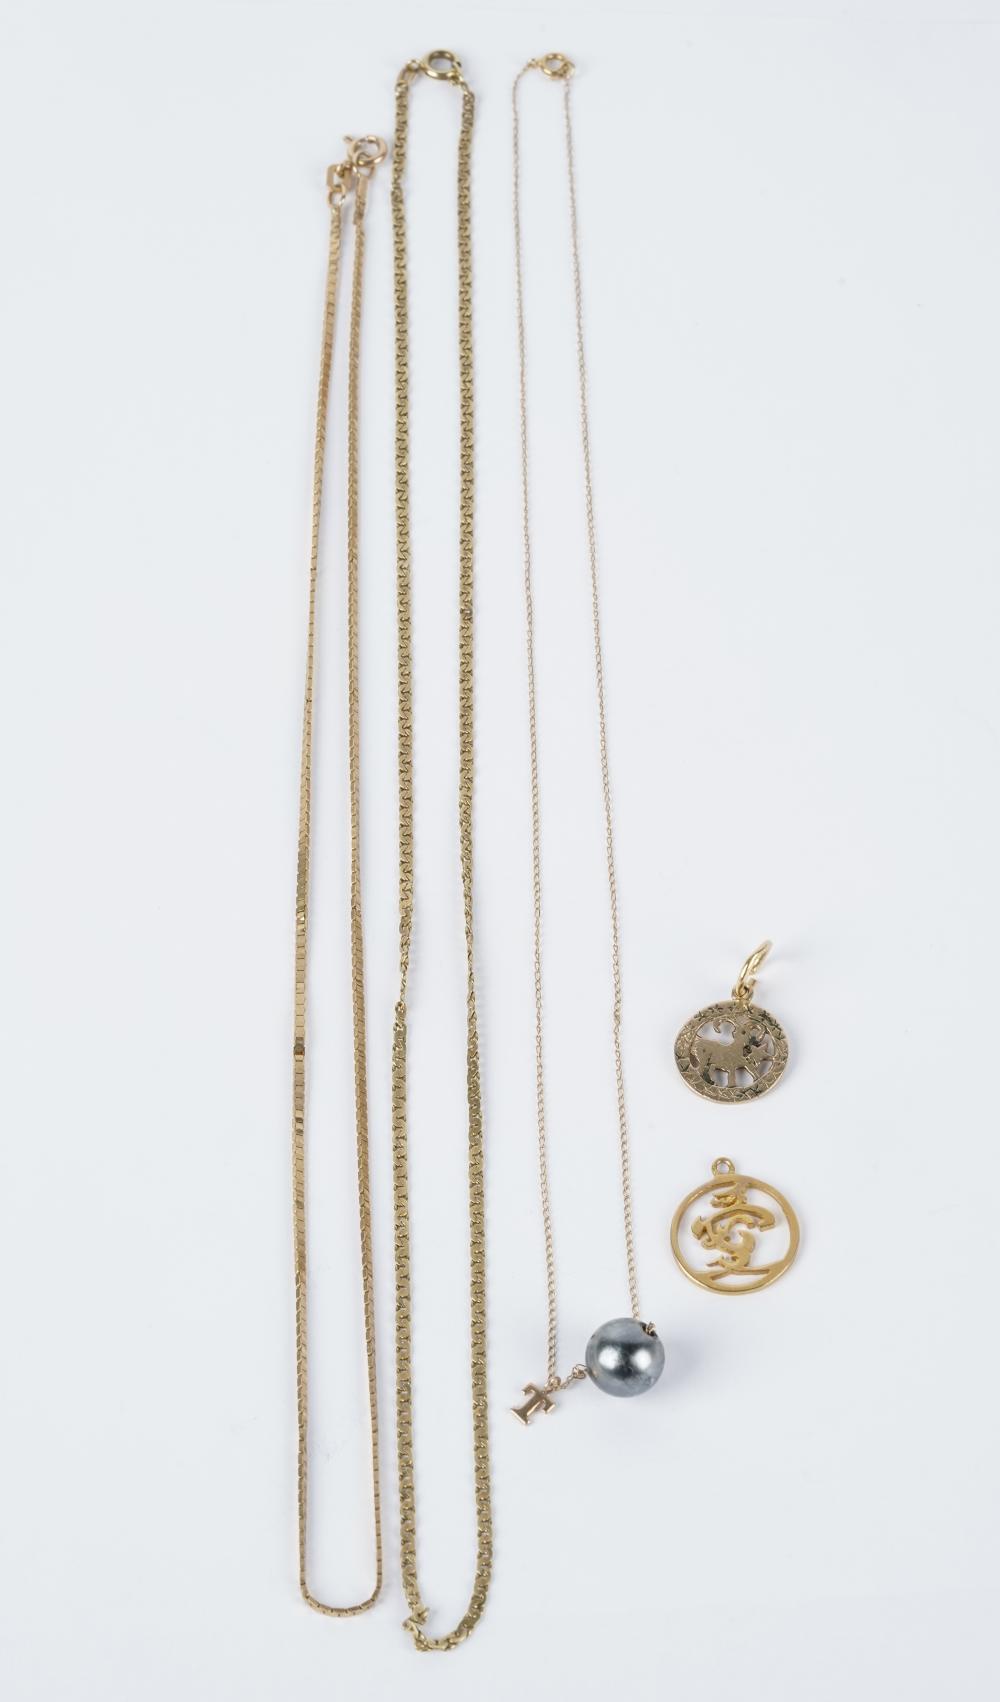 GROUP OF ASSORTED YELLOW GOLD CHAINS